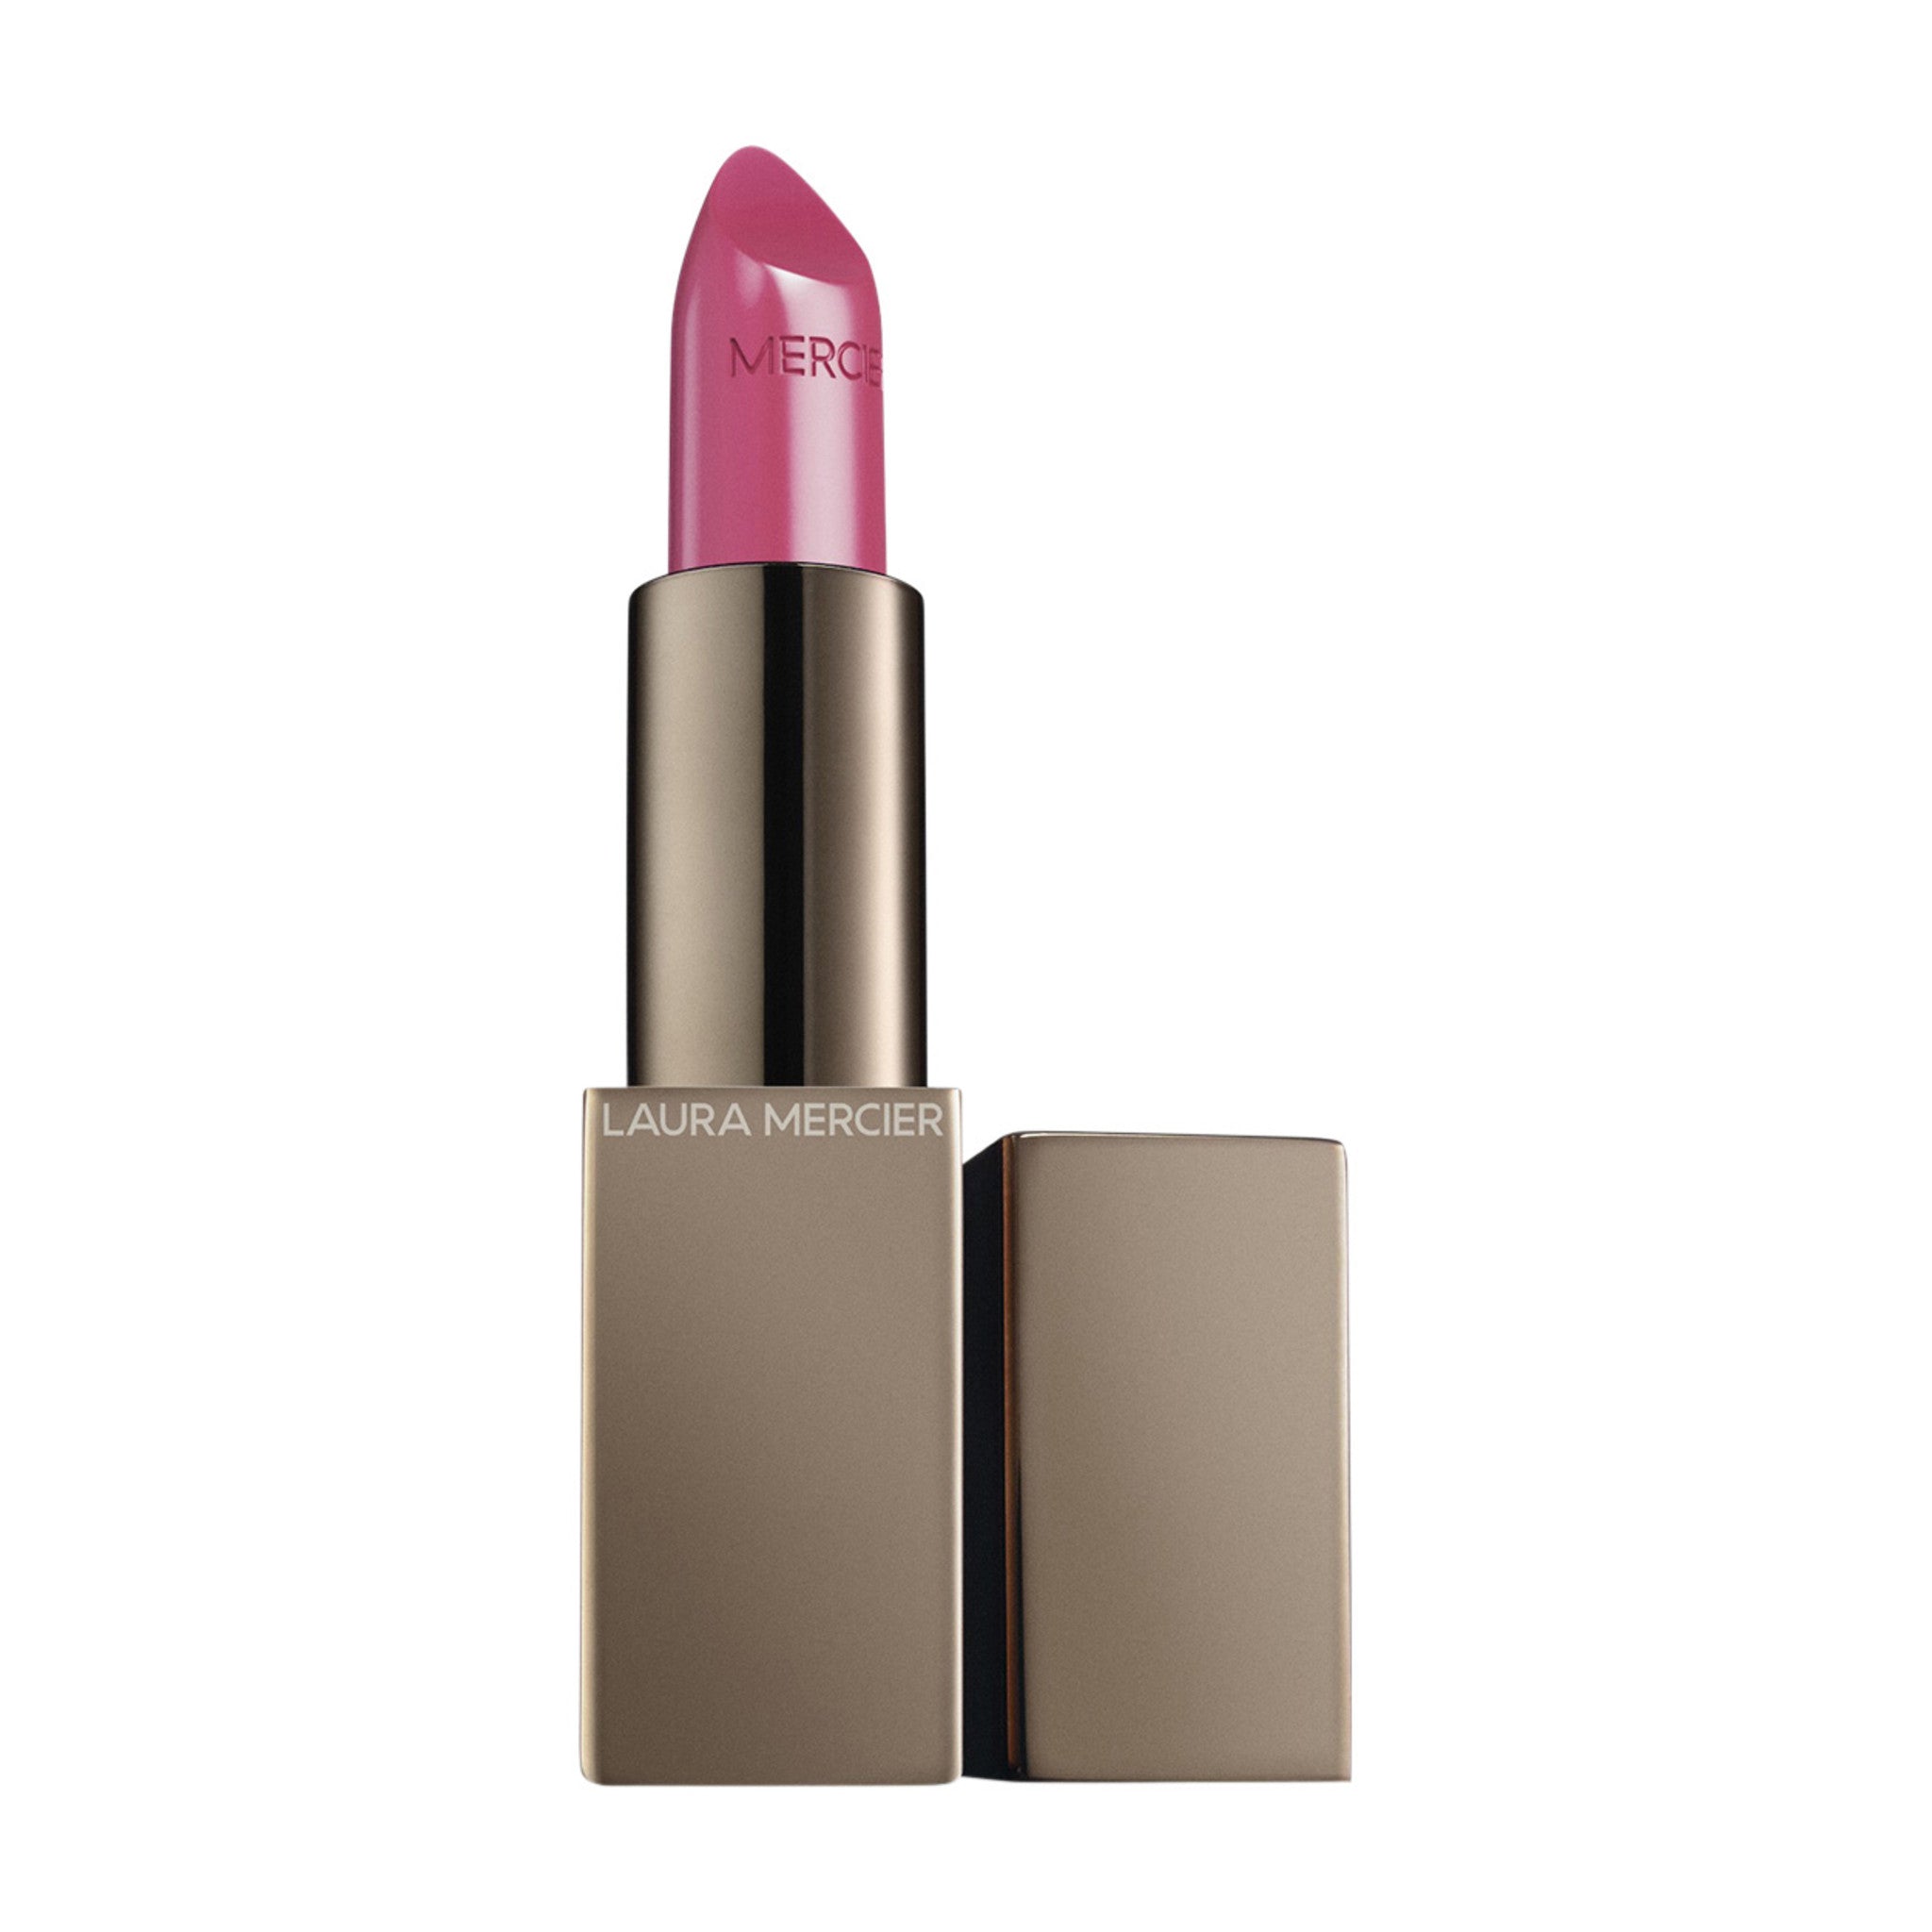 Laura Mercier Rouge Essentiel Silky Crème Lipstick Color/Shade variant: Blush Pink main image. This product is in the color pink